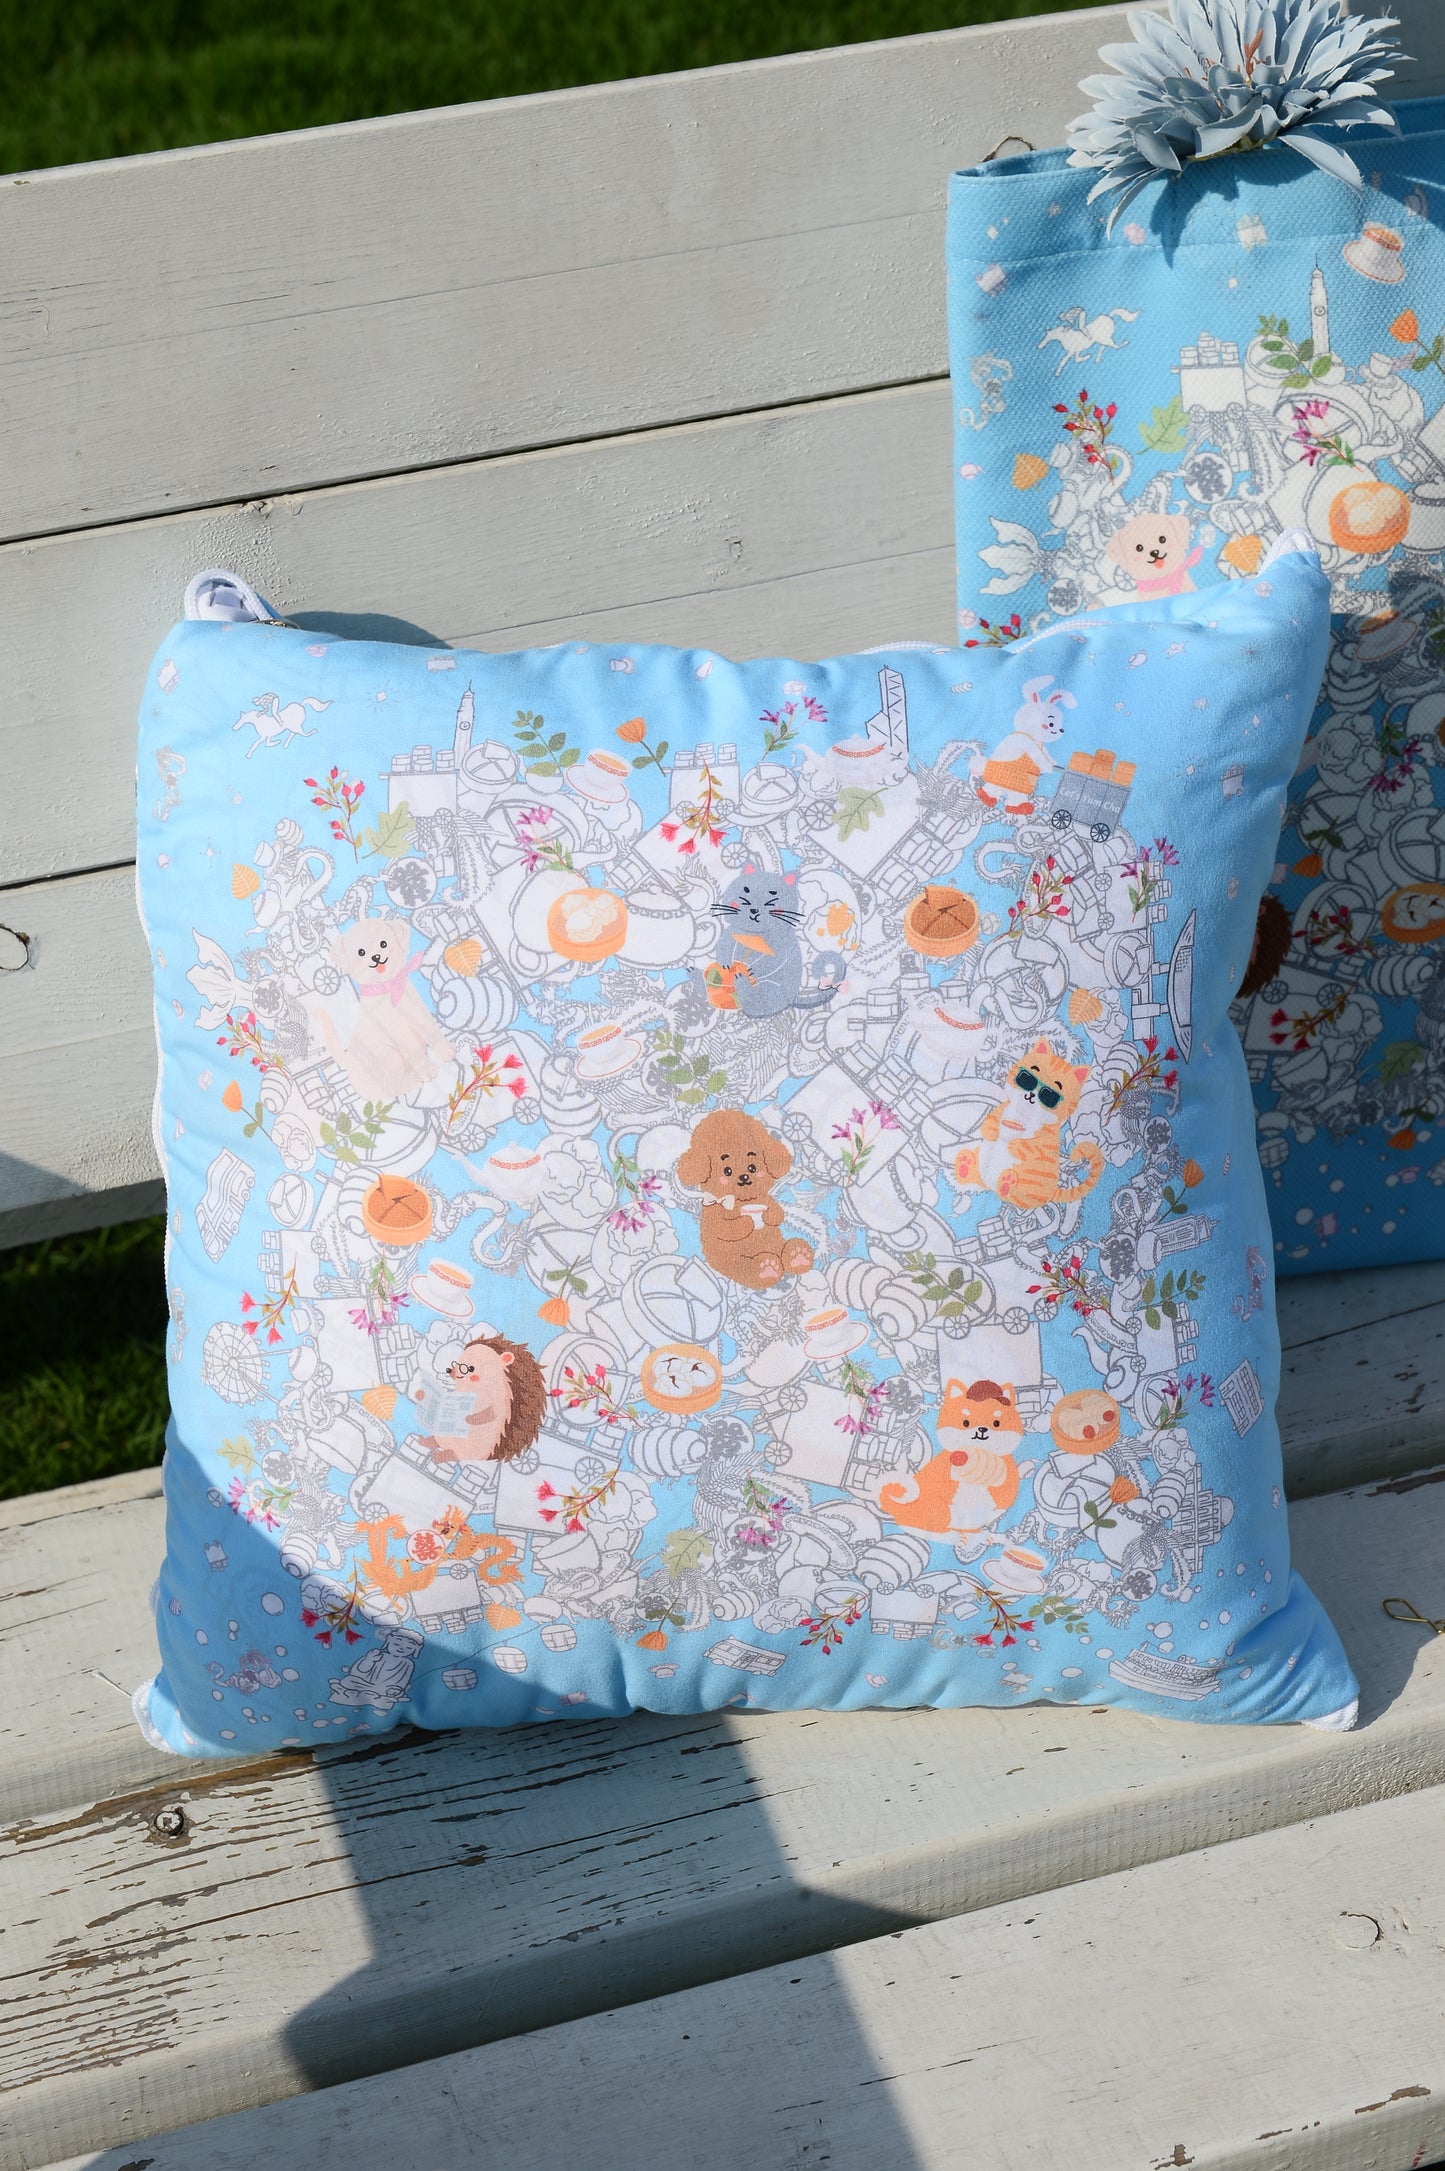 "Let's Yum Cha" Quilt Blanket Pillow 2 In 1